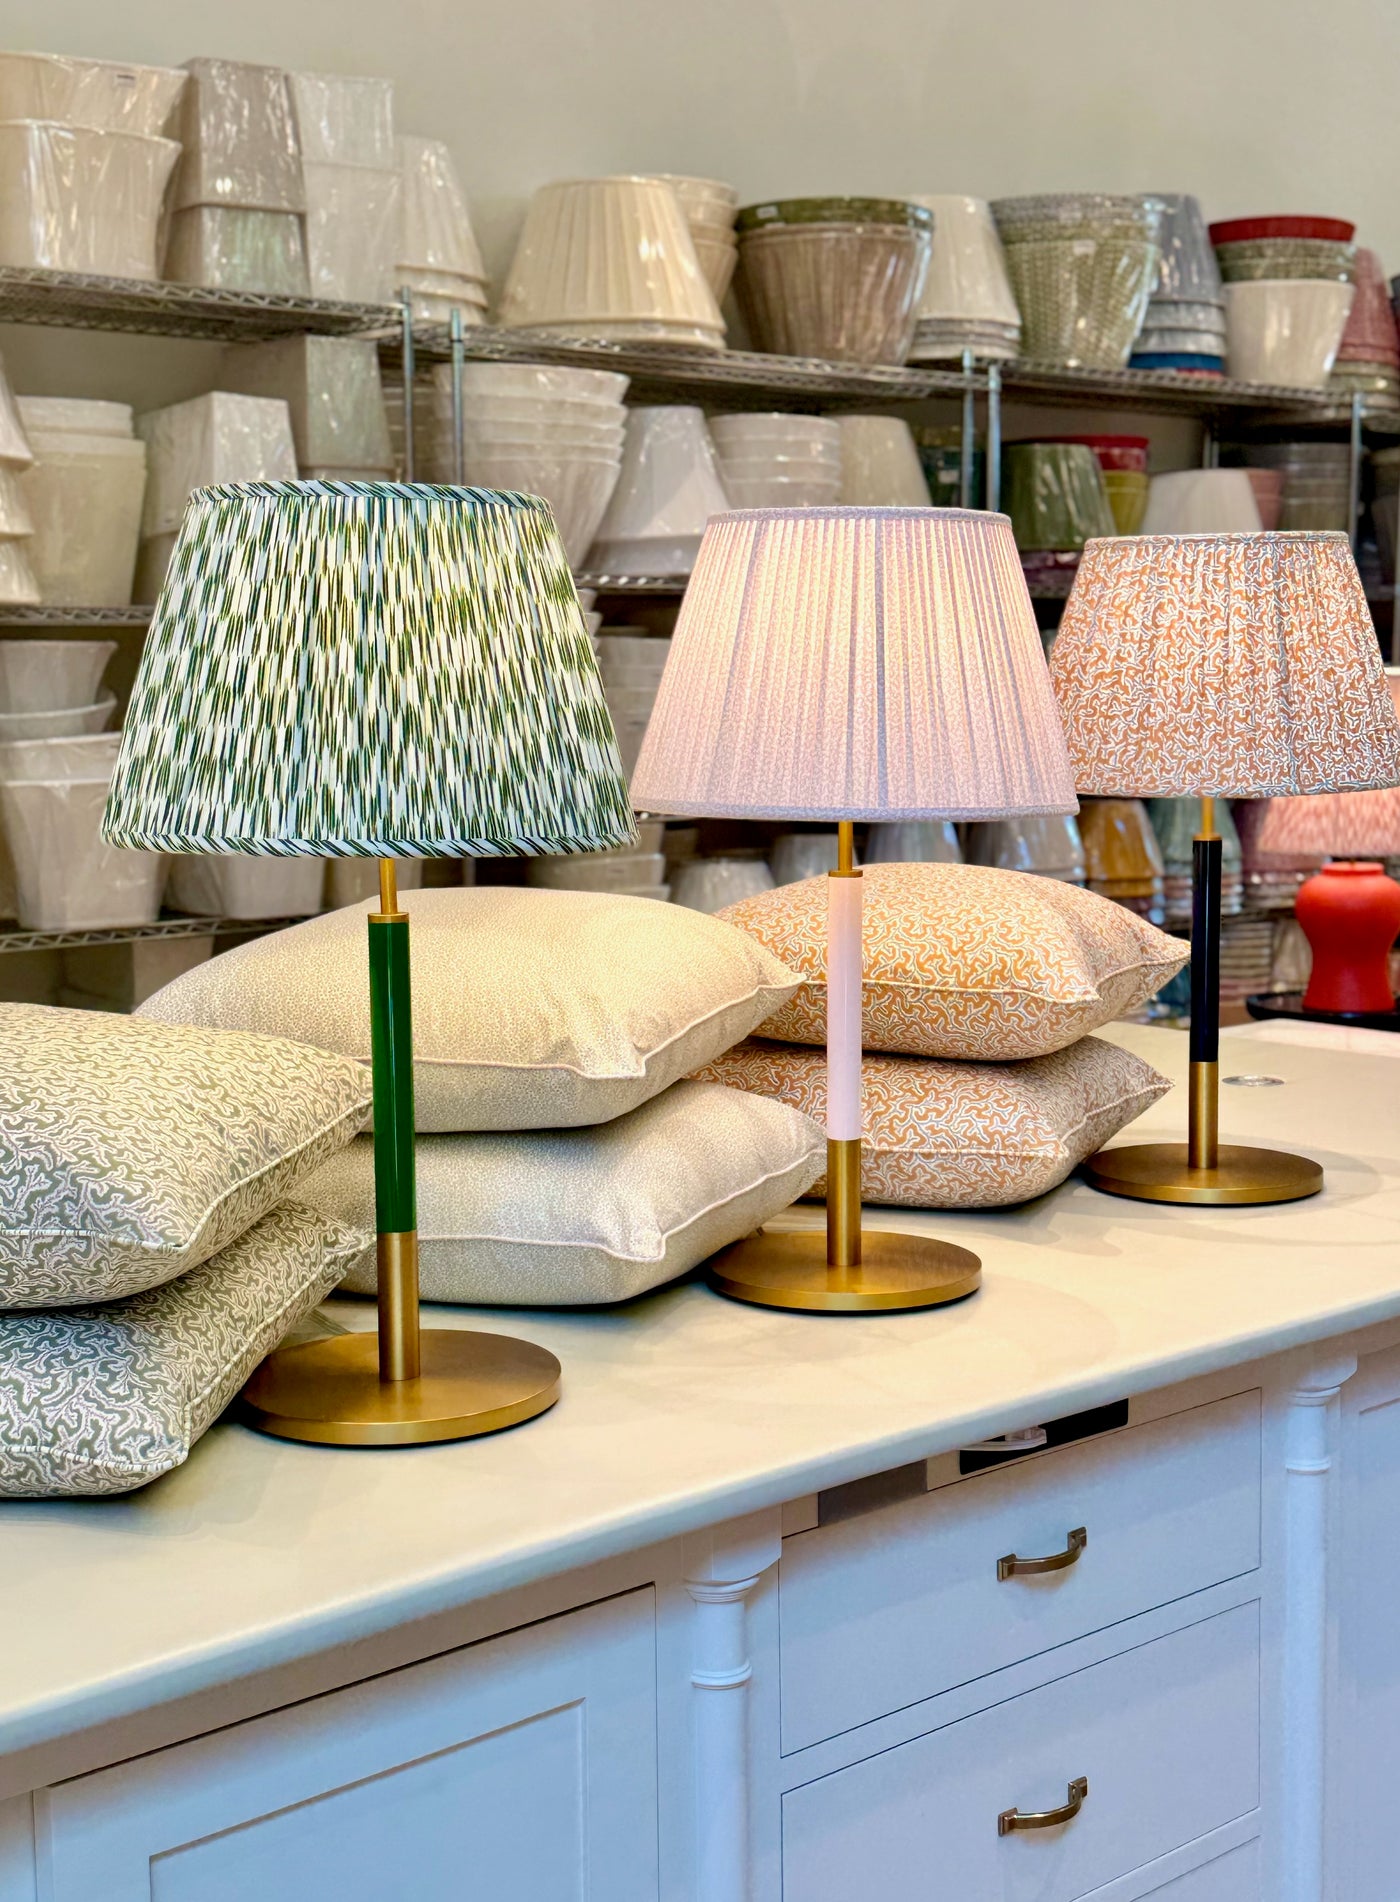 Group of Monroe Kate Spade lamp bases with Ian Sanderson lampshades and pillows.